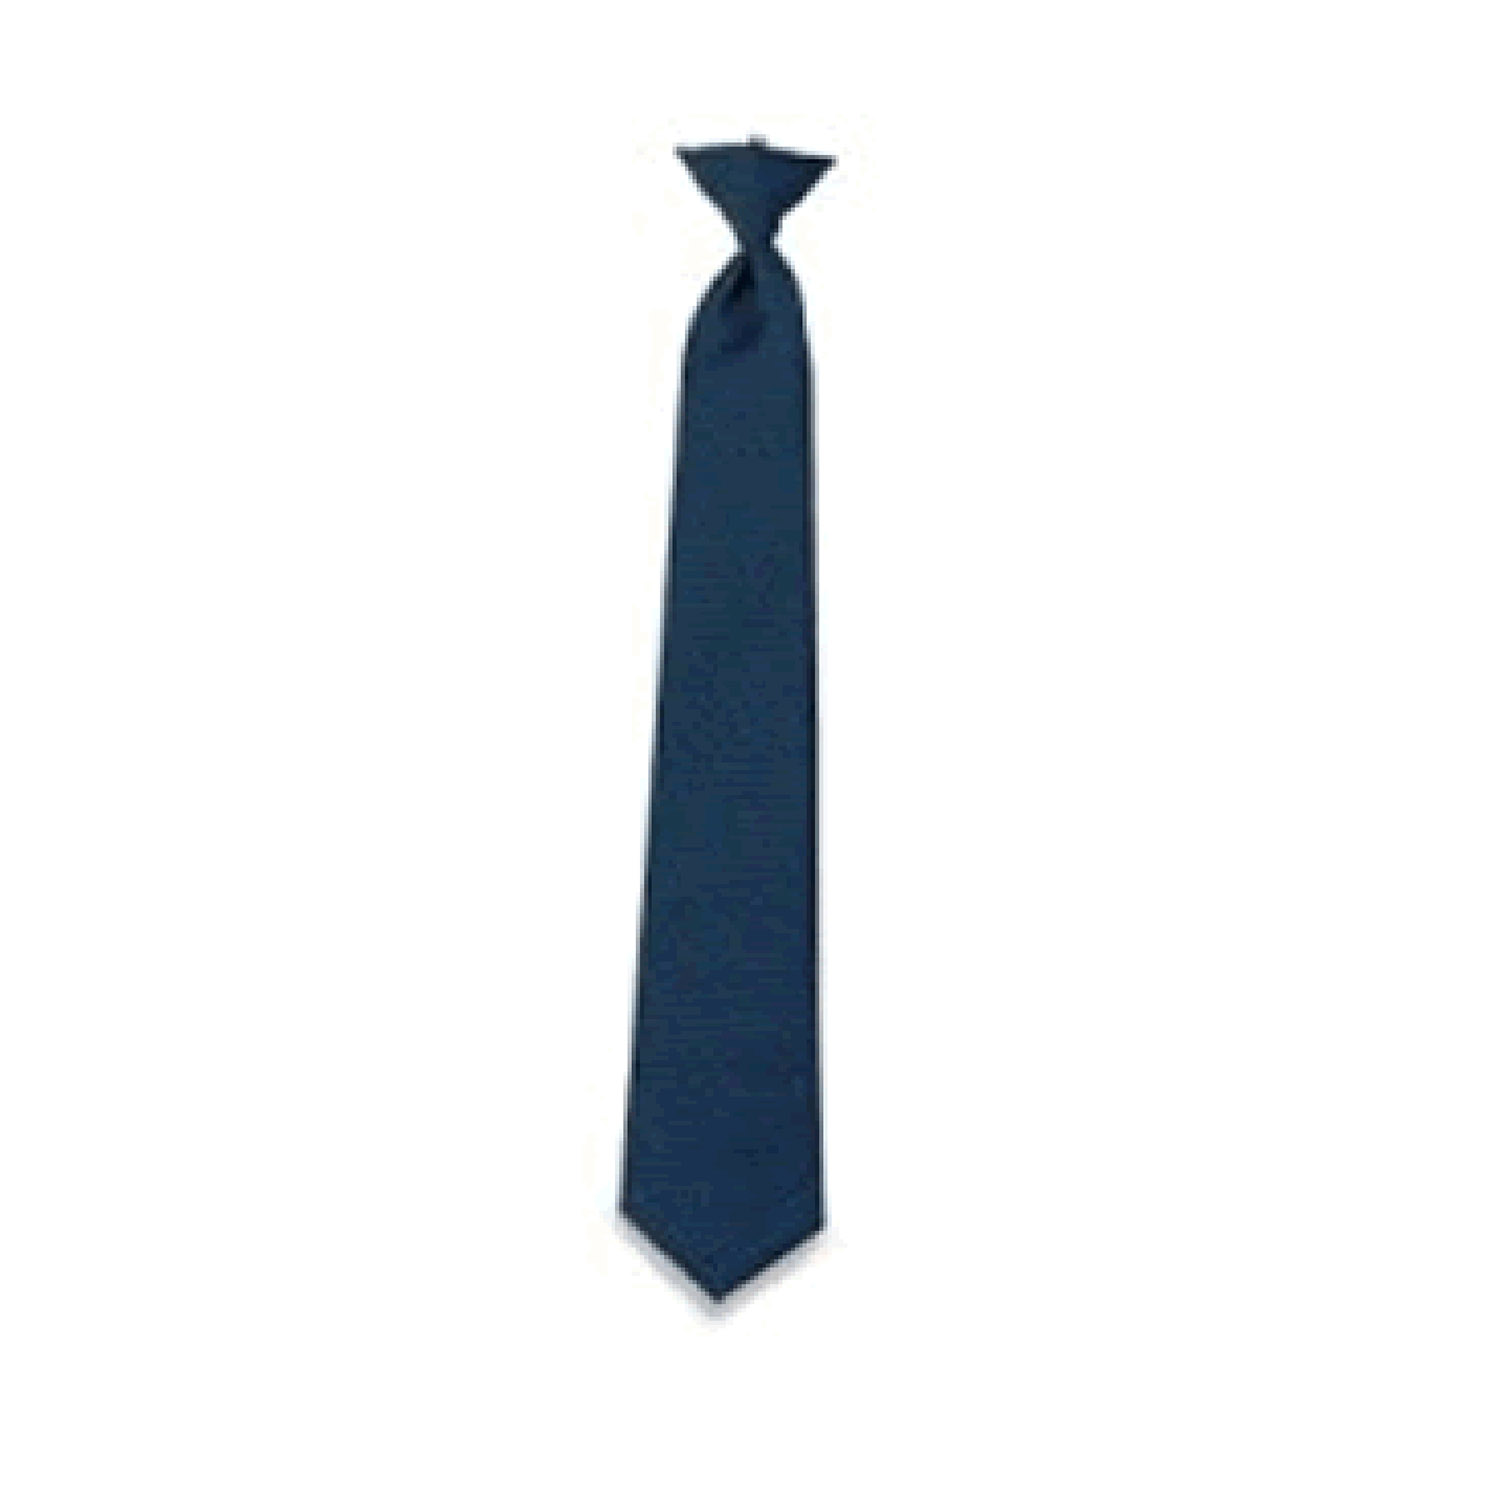 MENS POSTAL PINDOT FOUR IN HAND TIE